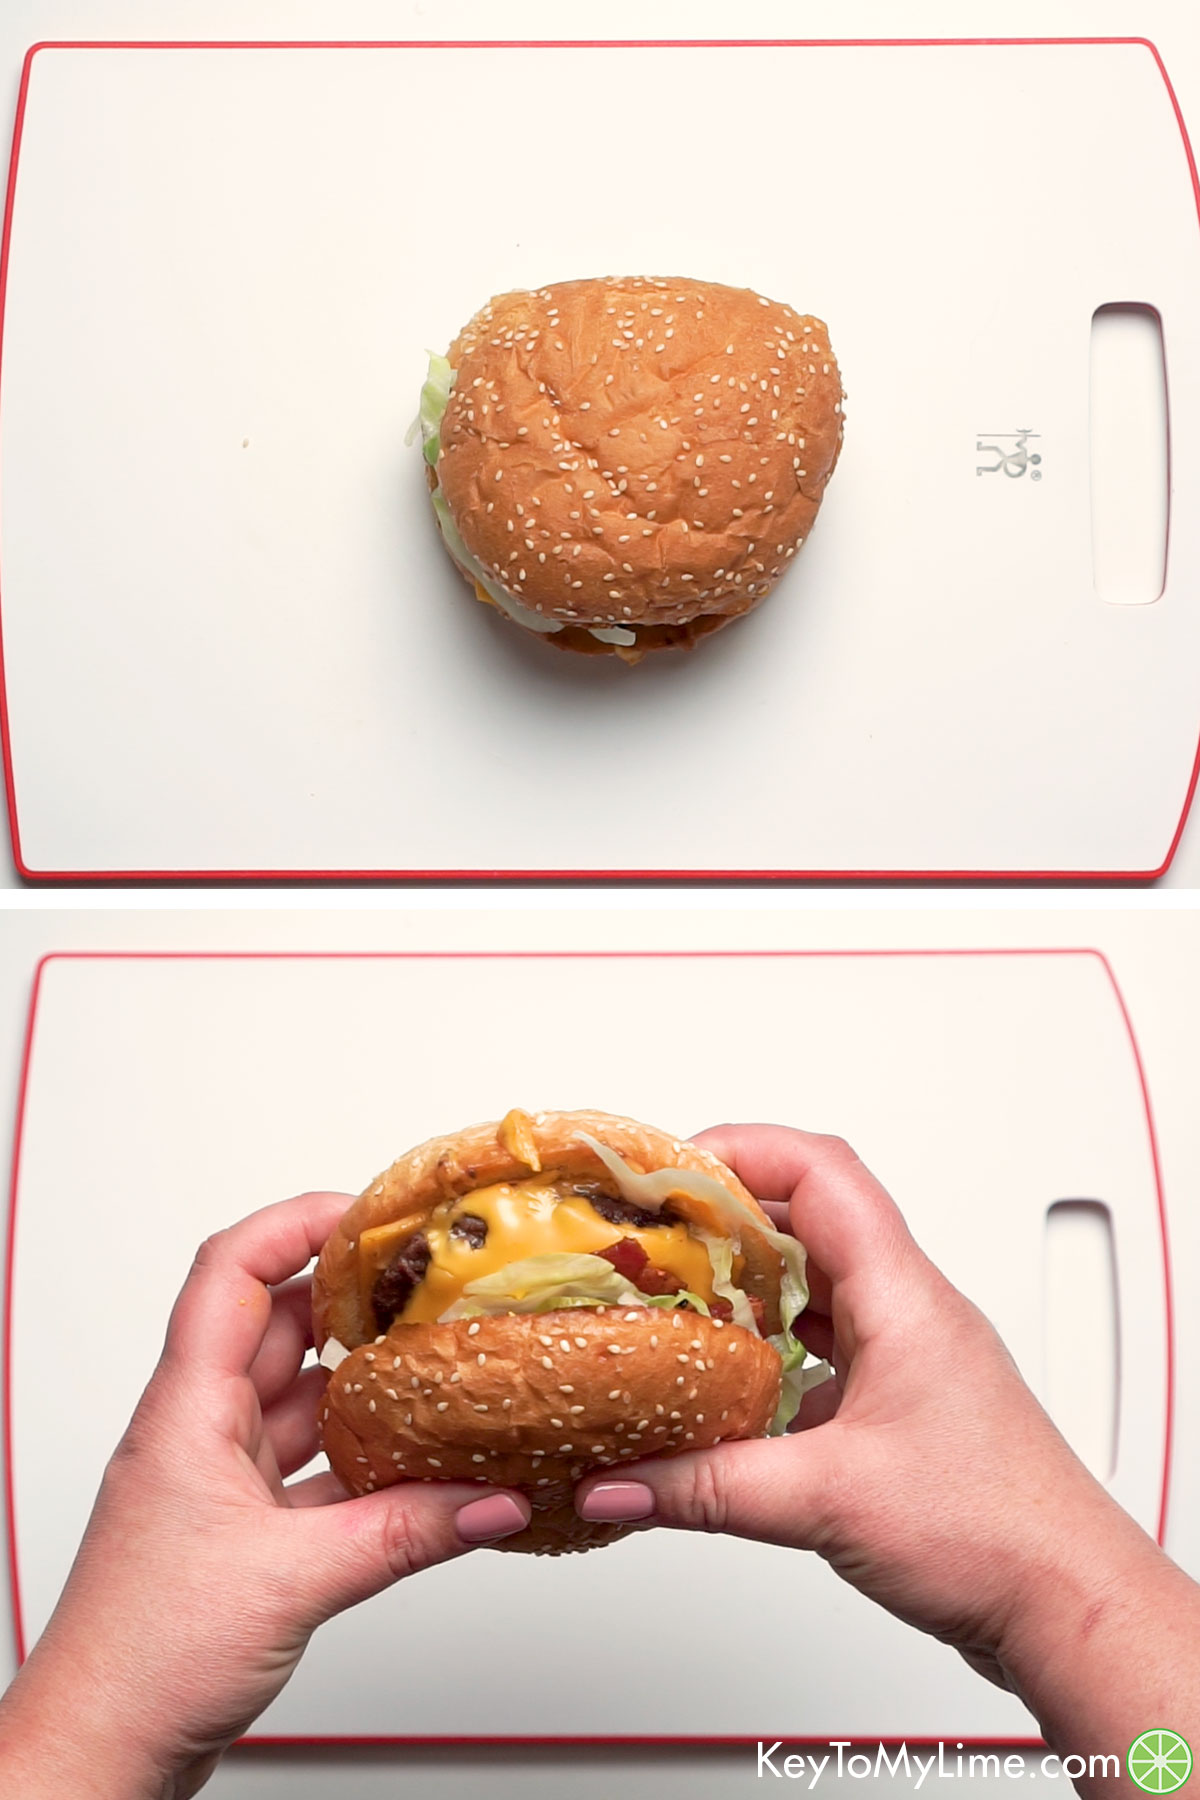 Placing the top half of the hamburger bun on top, then picking it up to take a bite.